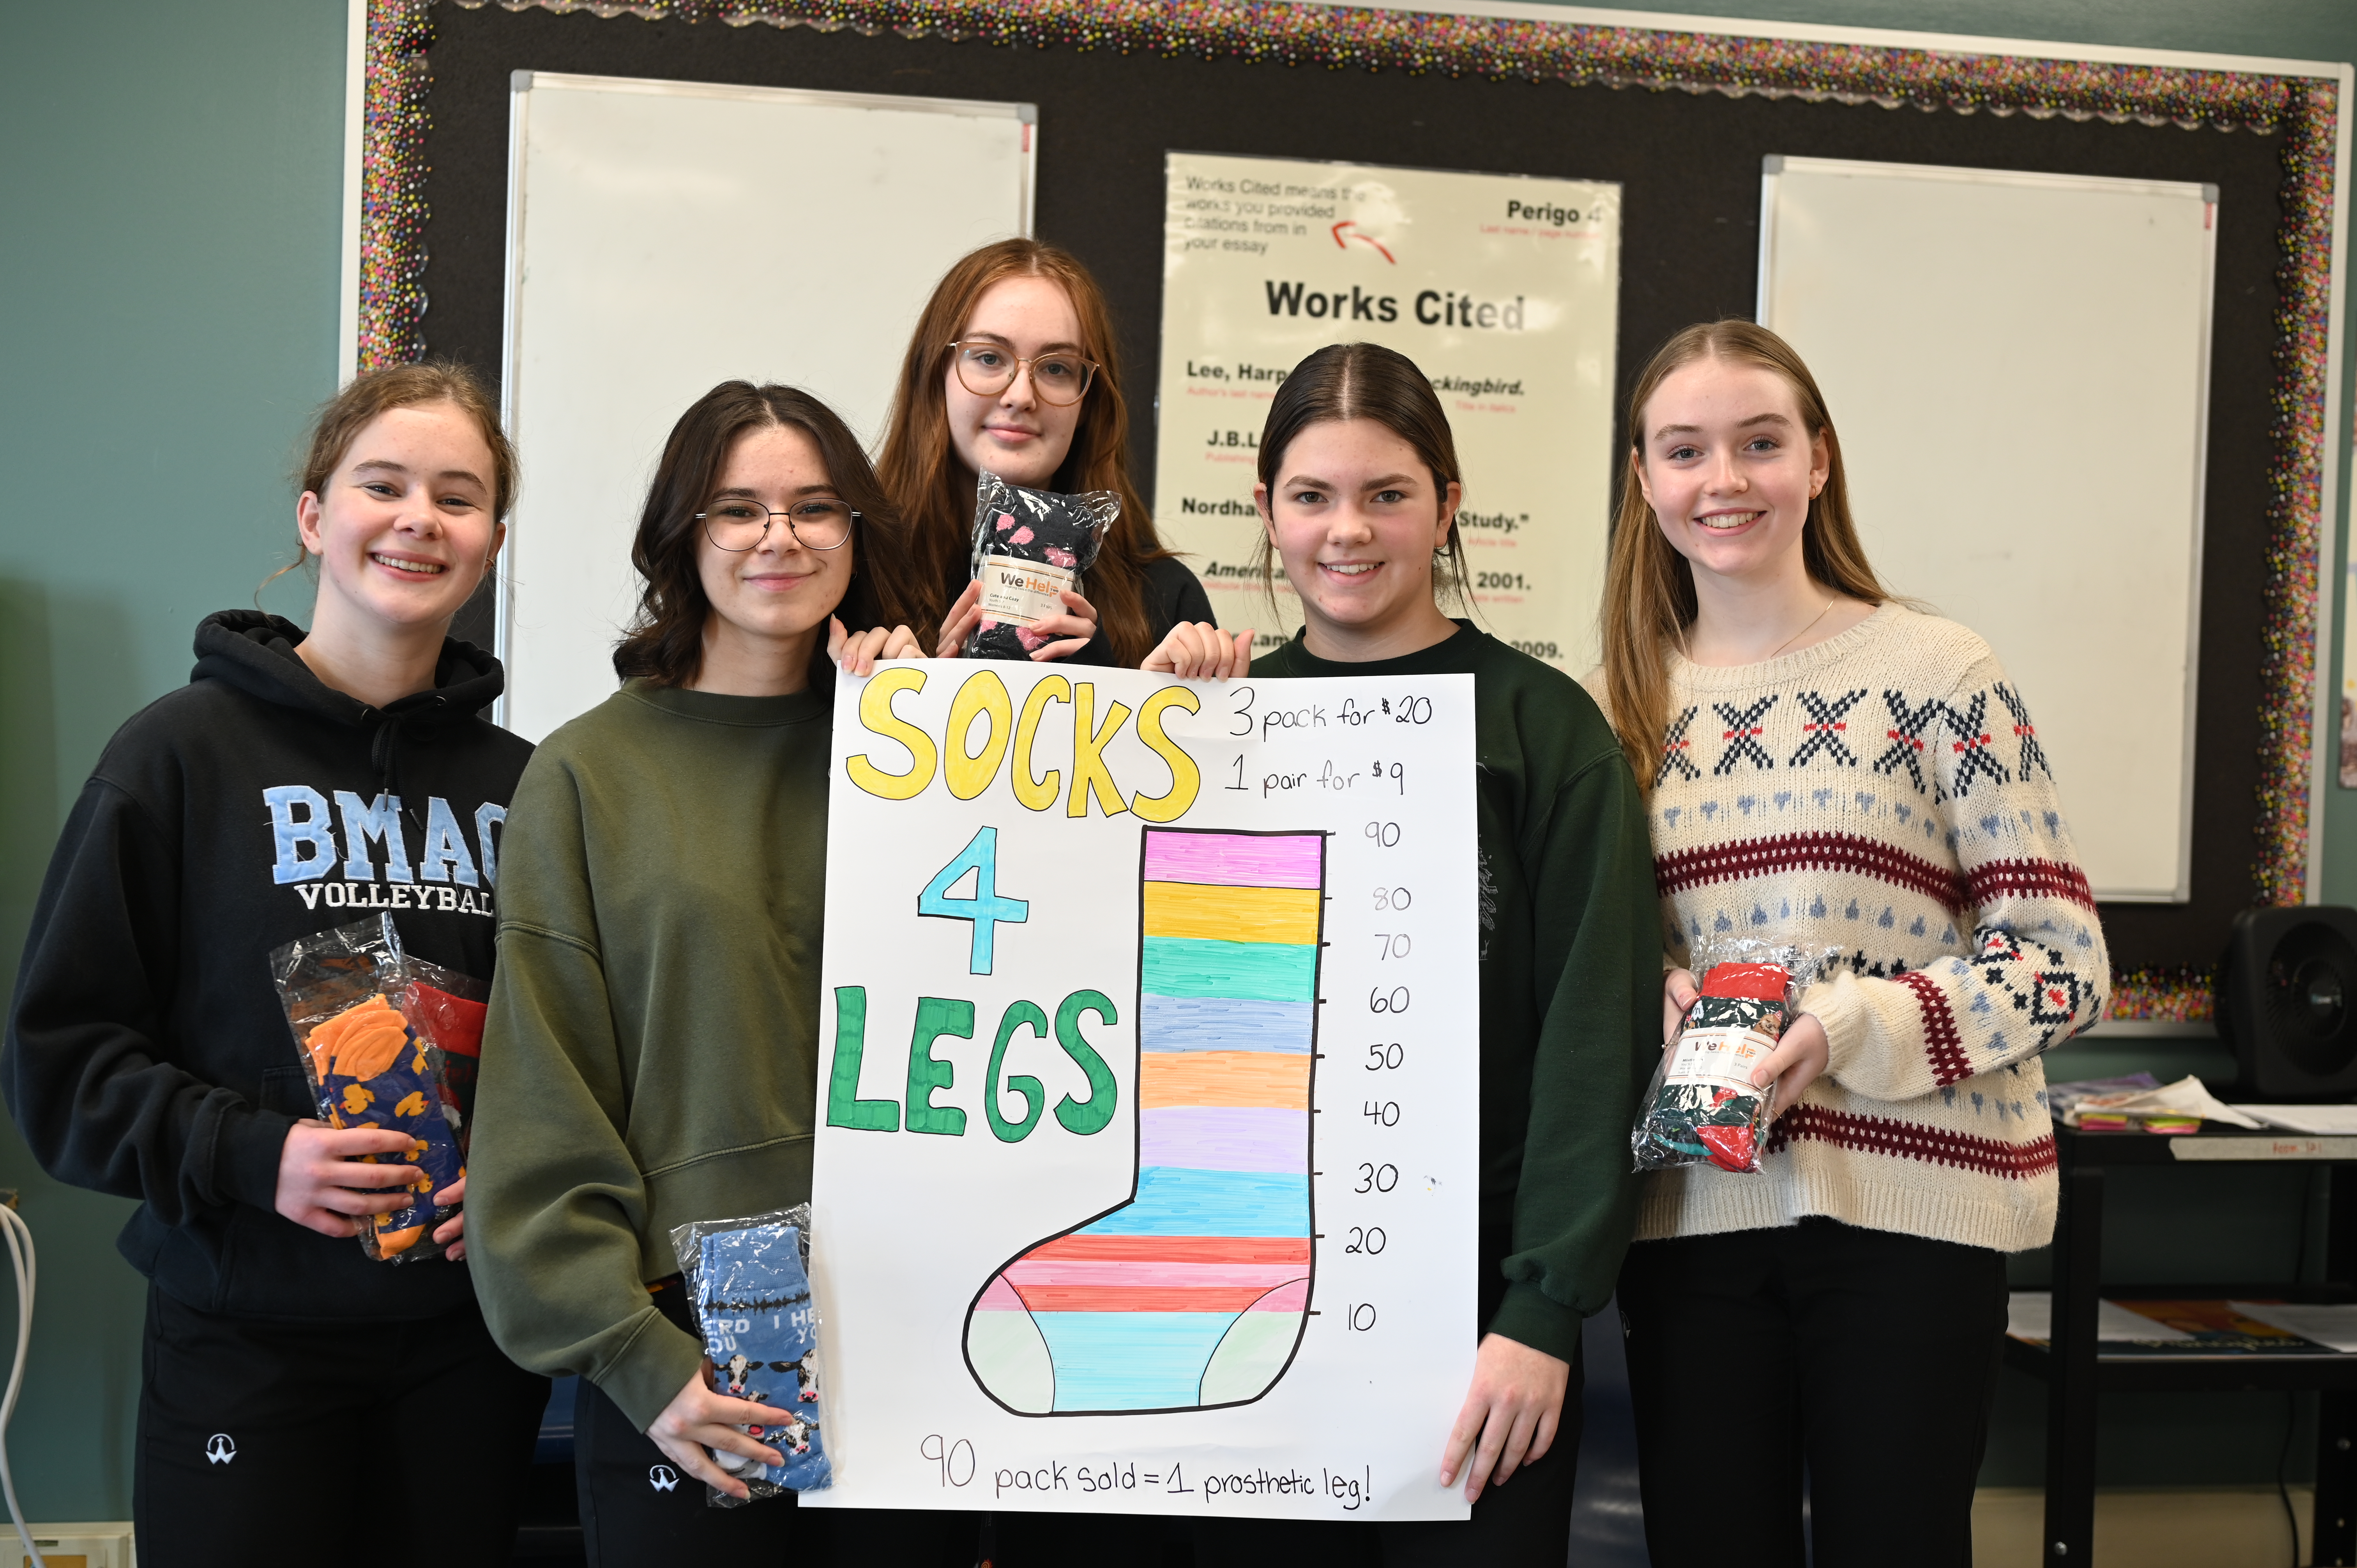 Guelph Catholic students sold socks to buy prosthetic leg as part of project